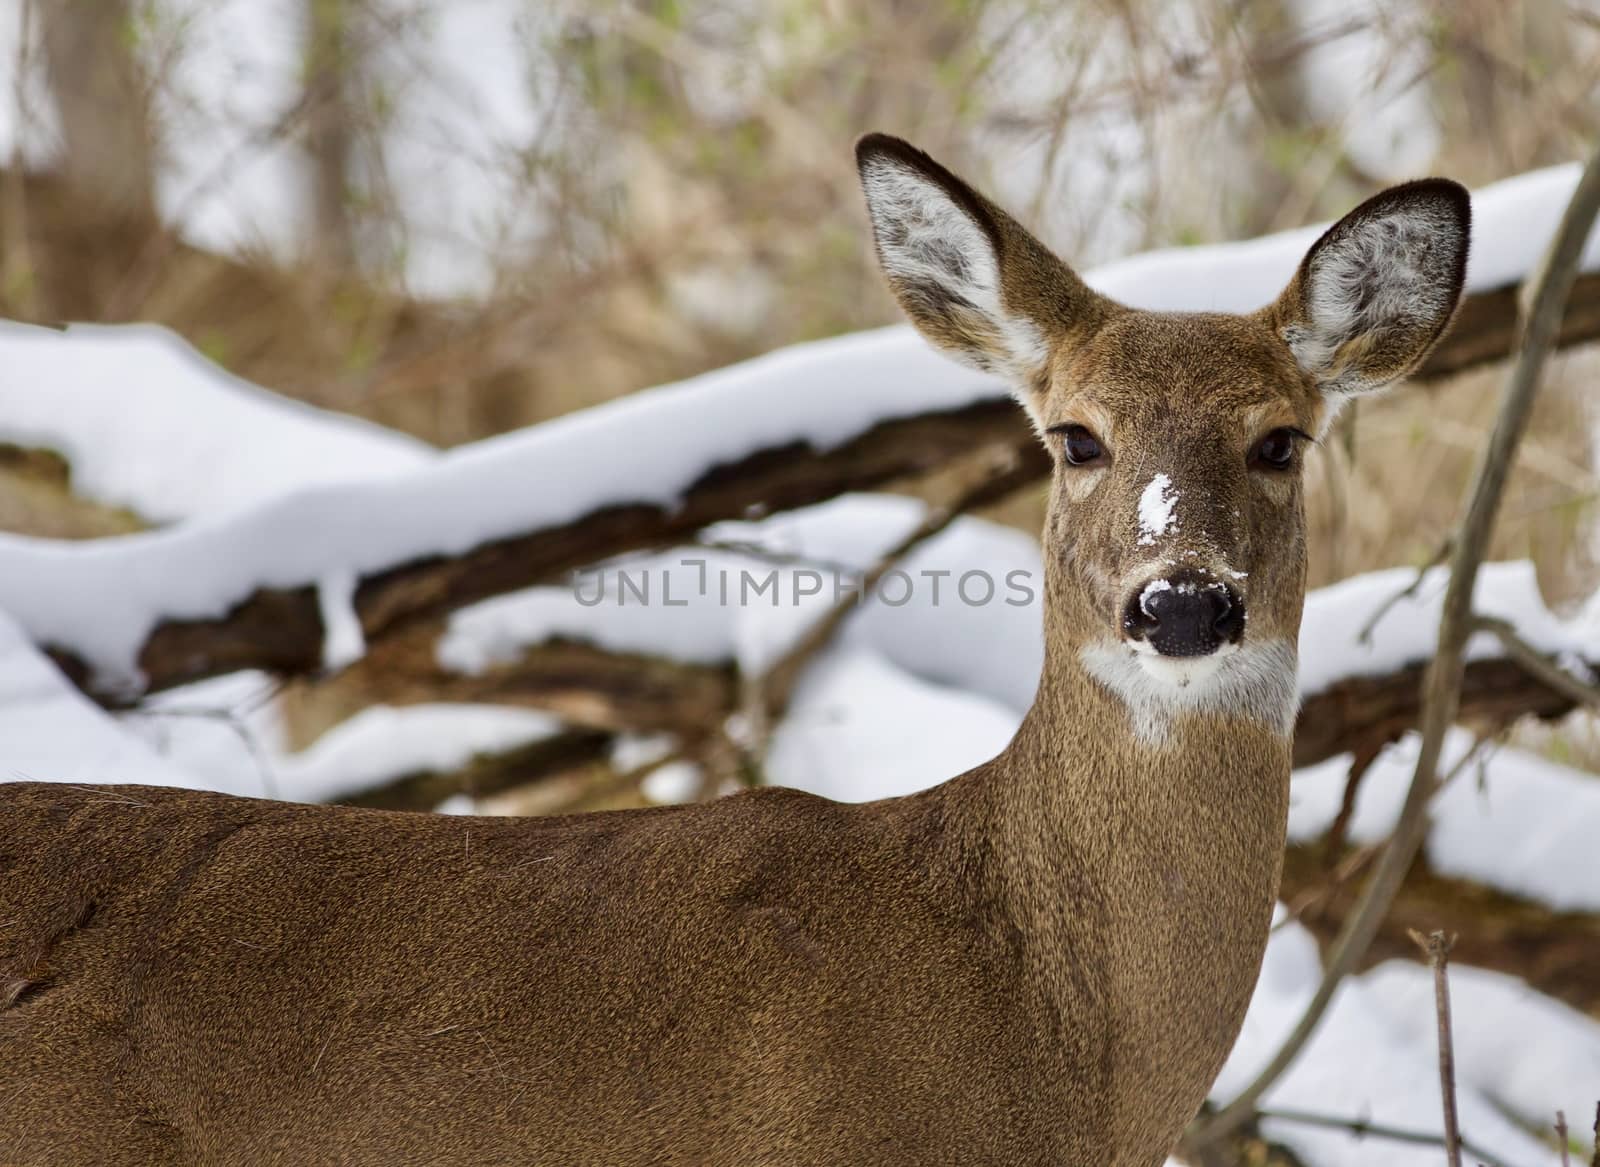 Beautiful image of a wild deer in the snowy forest by teo